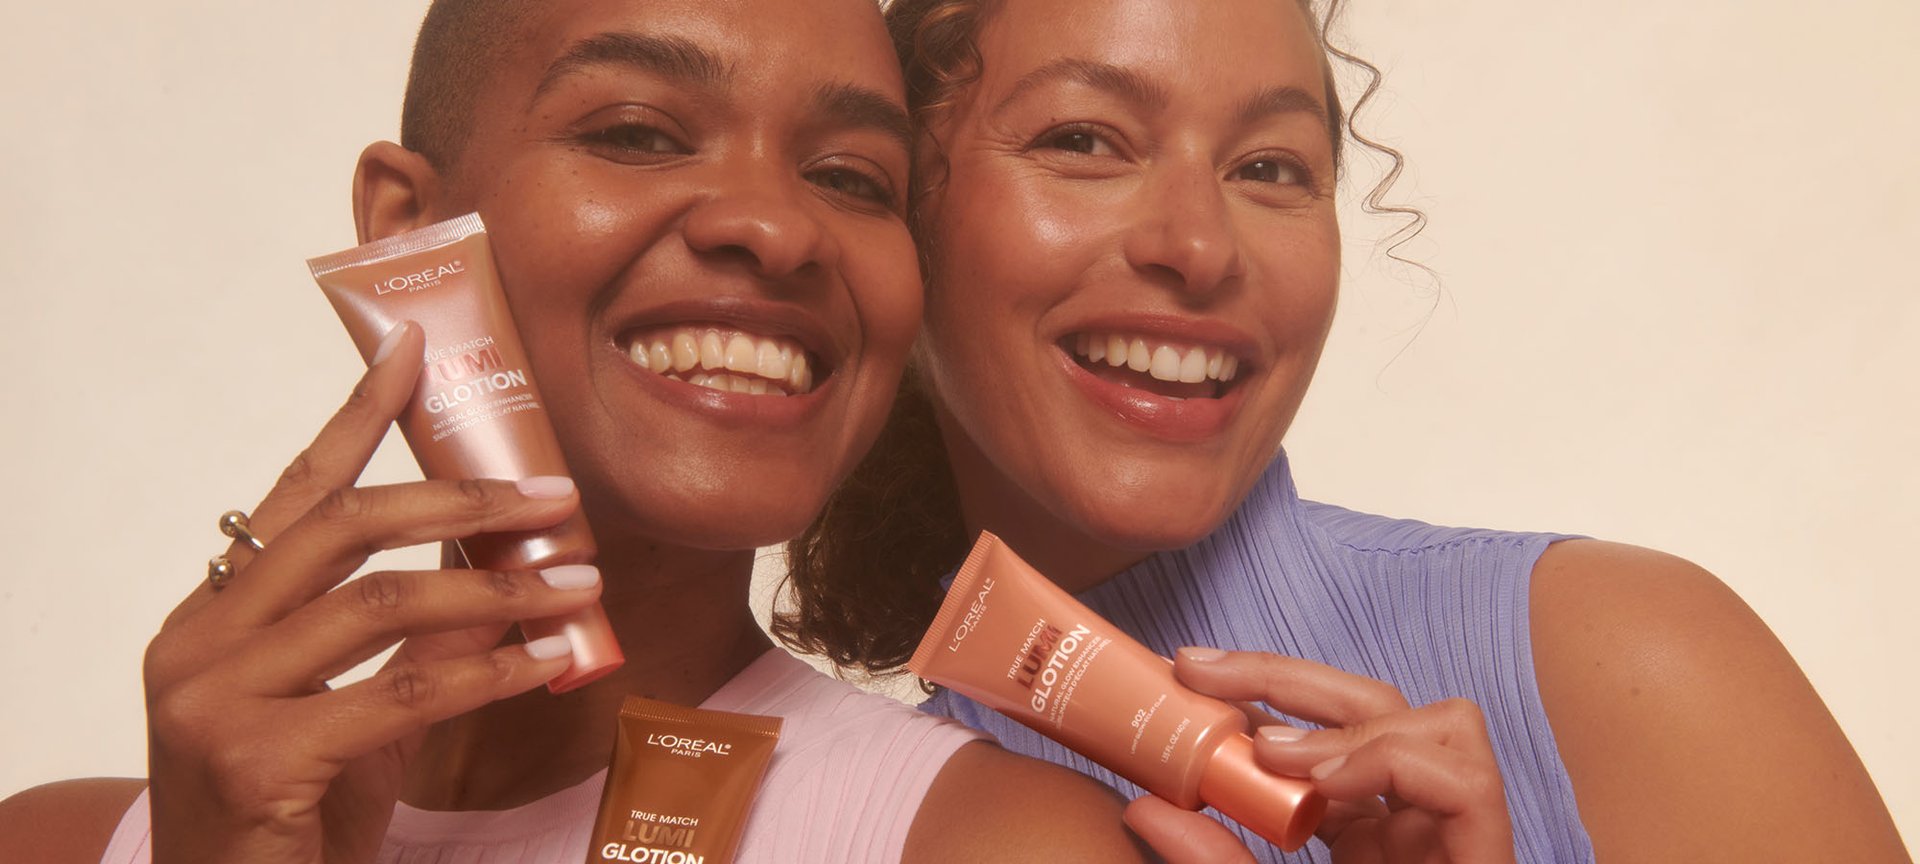 How to Get Bronzed Skin Without the Sun - L'Oréal Paris